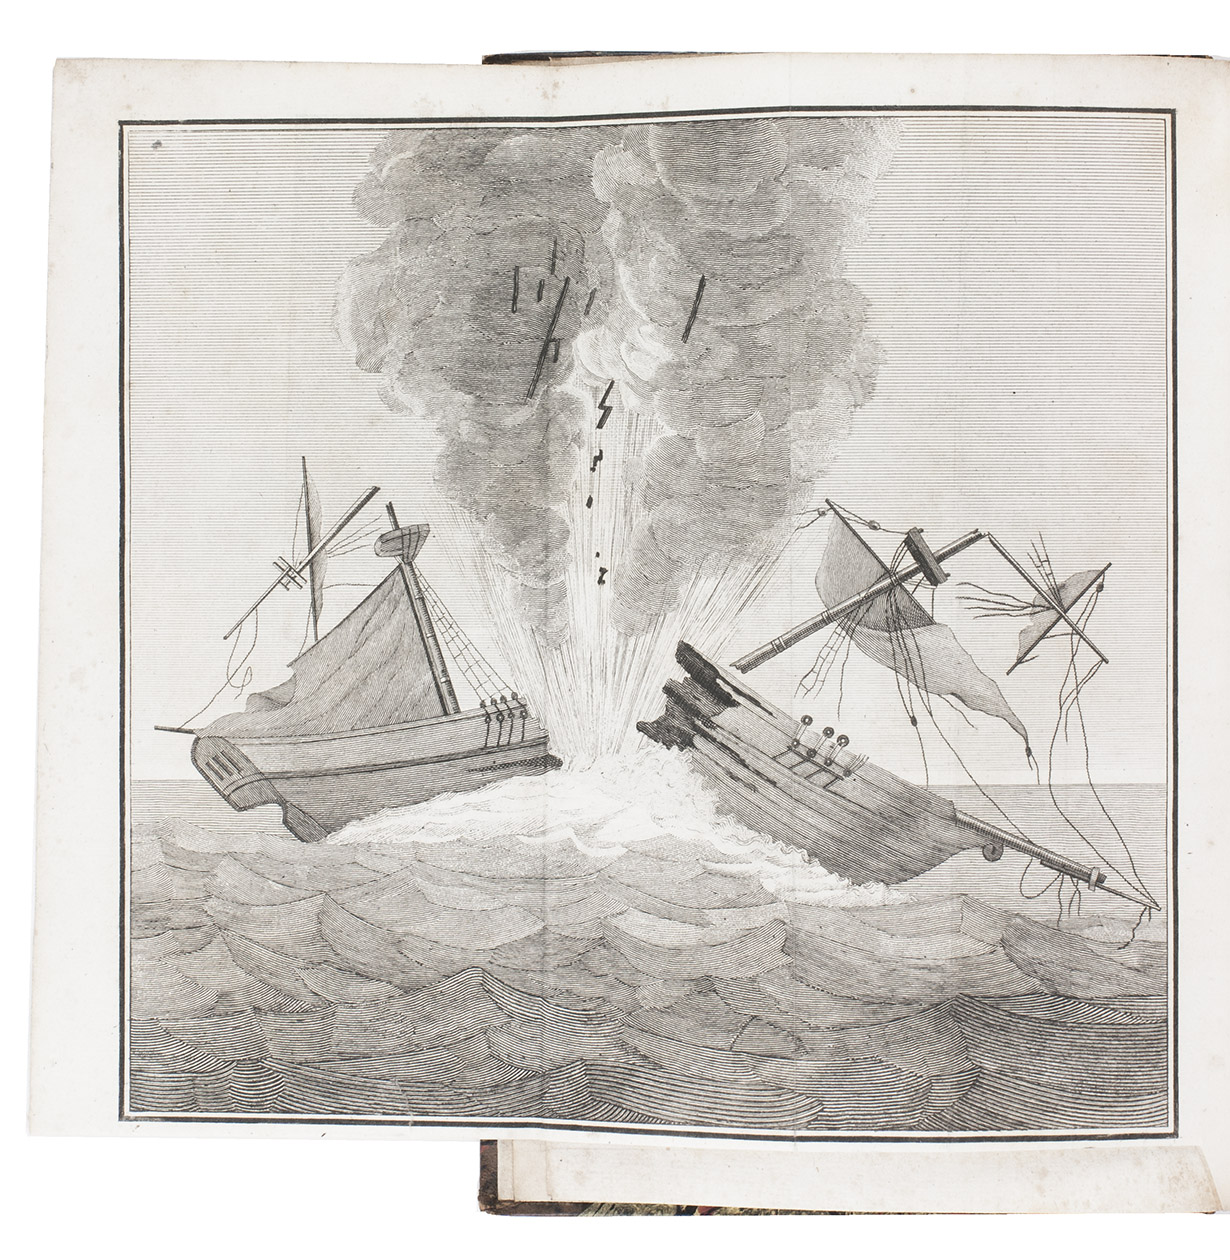 MONTGRY, Jacques-Philippe Mrigon de. - Mmoire sur les mines flottantes et les petards flottans, ou machines infernales maritimes. Paris, Bachlier, libraire pour la marine (printed by De Fain), 1819. 8vo. With a finely engraved folding copperplate of a ship being blown up by a mine (16.5 x 17.5 cm). Lacking the half-title and the final leaf with the publisher's list of books, but with the folding plate, often lacking. Contemporary half tree calf, stormont marbled sides.